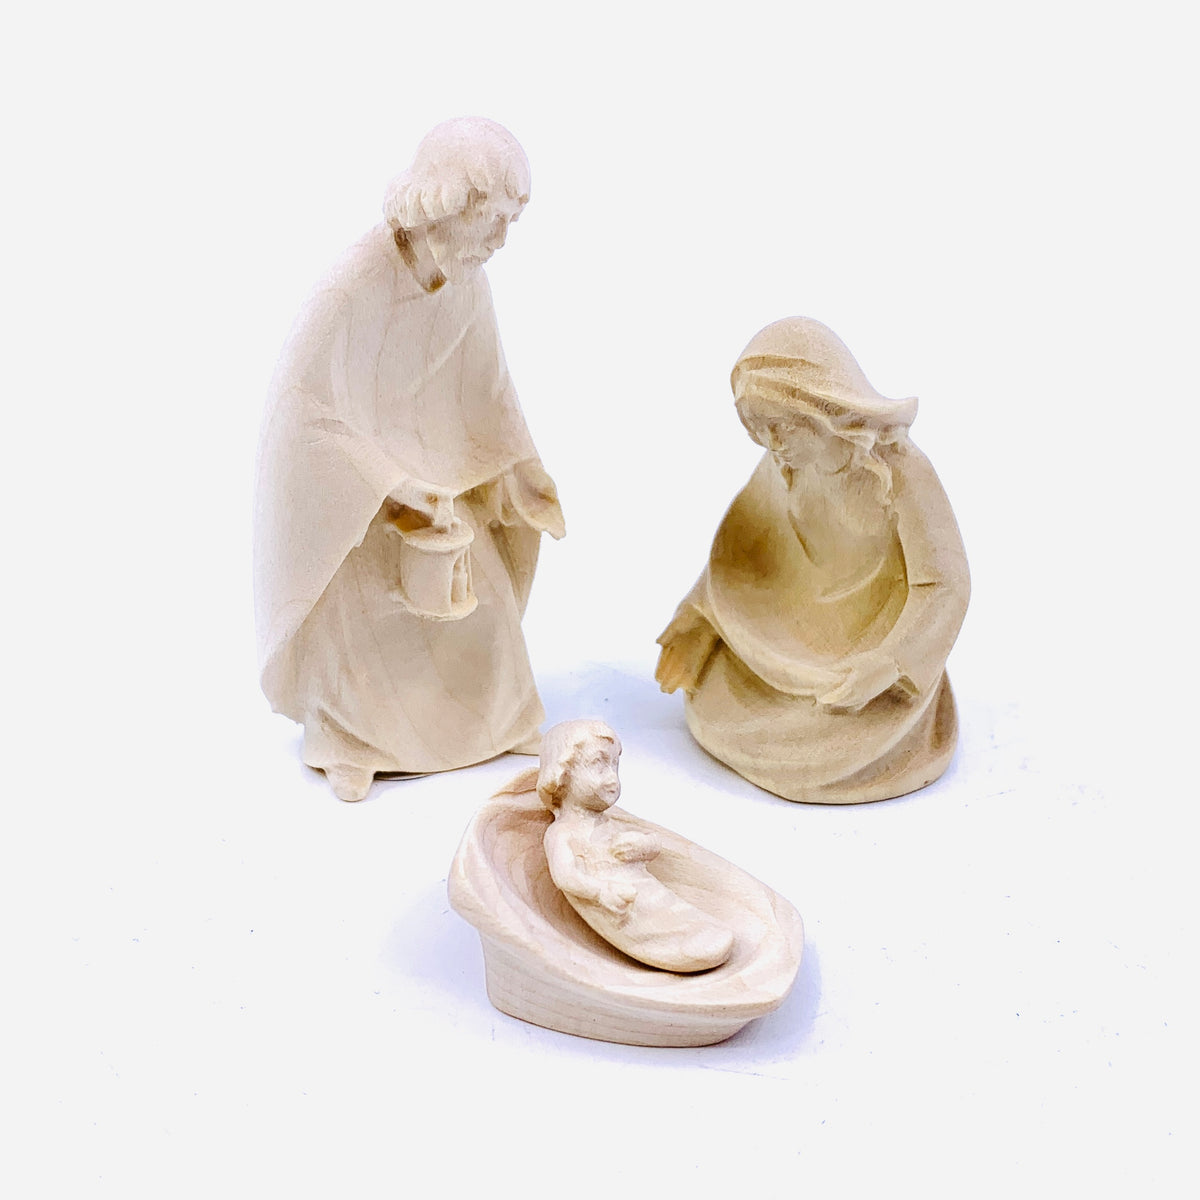 Wood Sculpted Nativity Set, St Joseph, Mary and Infant with Cradle 1